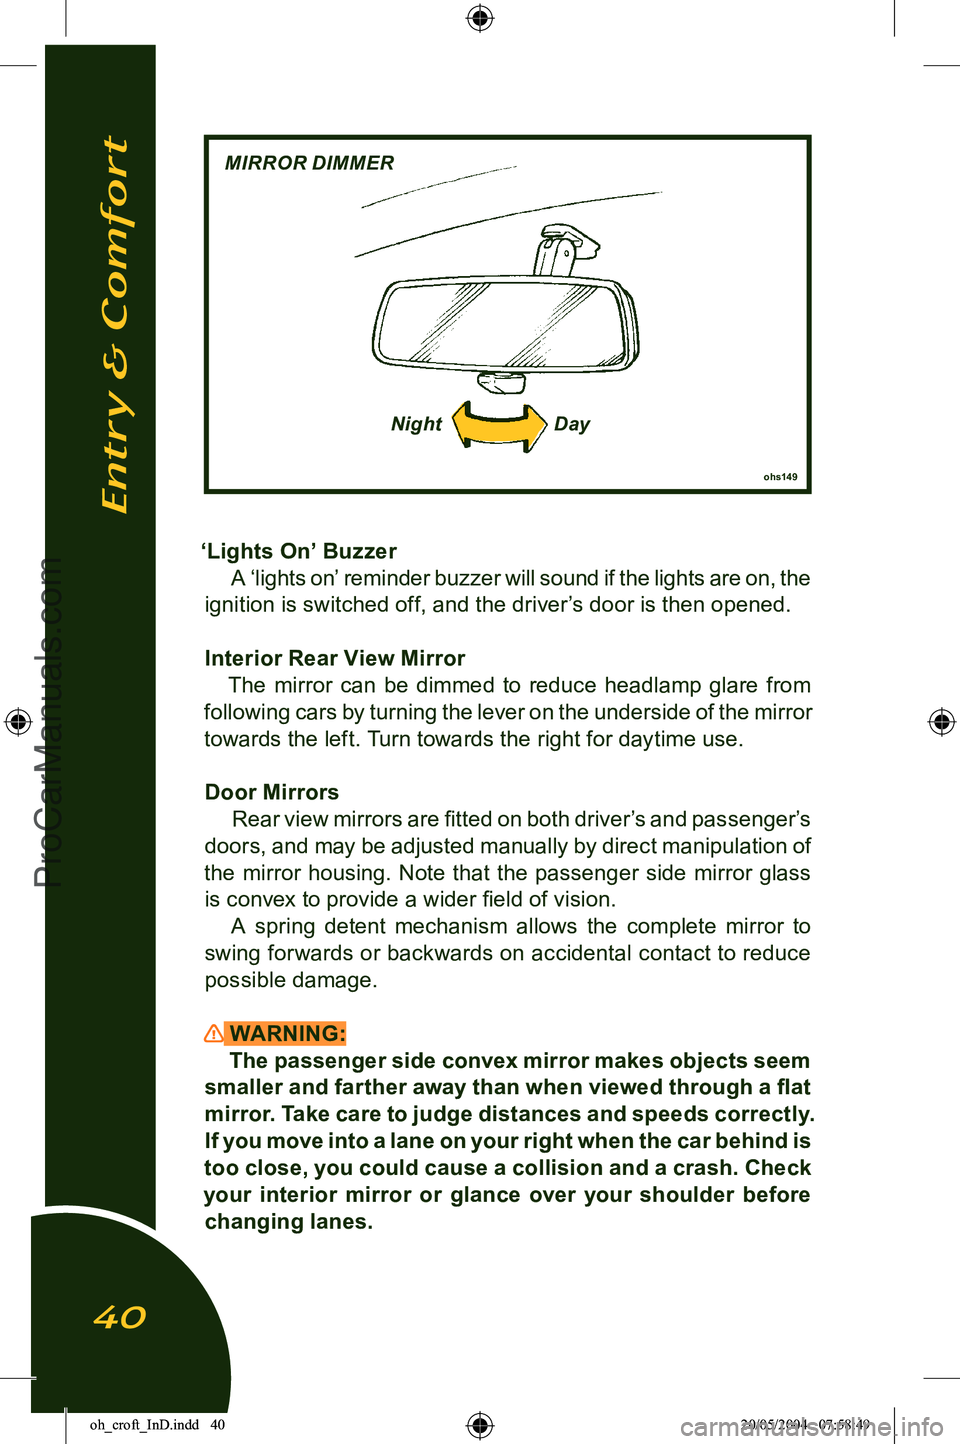 LOTUS ELISE 2005 Service Manual 
ohs149
NightDay
‘Lights On’ Buzzer
A ‘lights on’ reminder buzzer will sound if the lights are on, the 
ignition is switched off, and the driver’s door is then opened.
Interior Rear View Mir